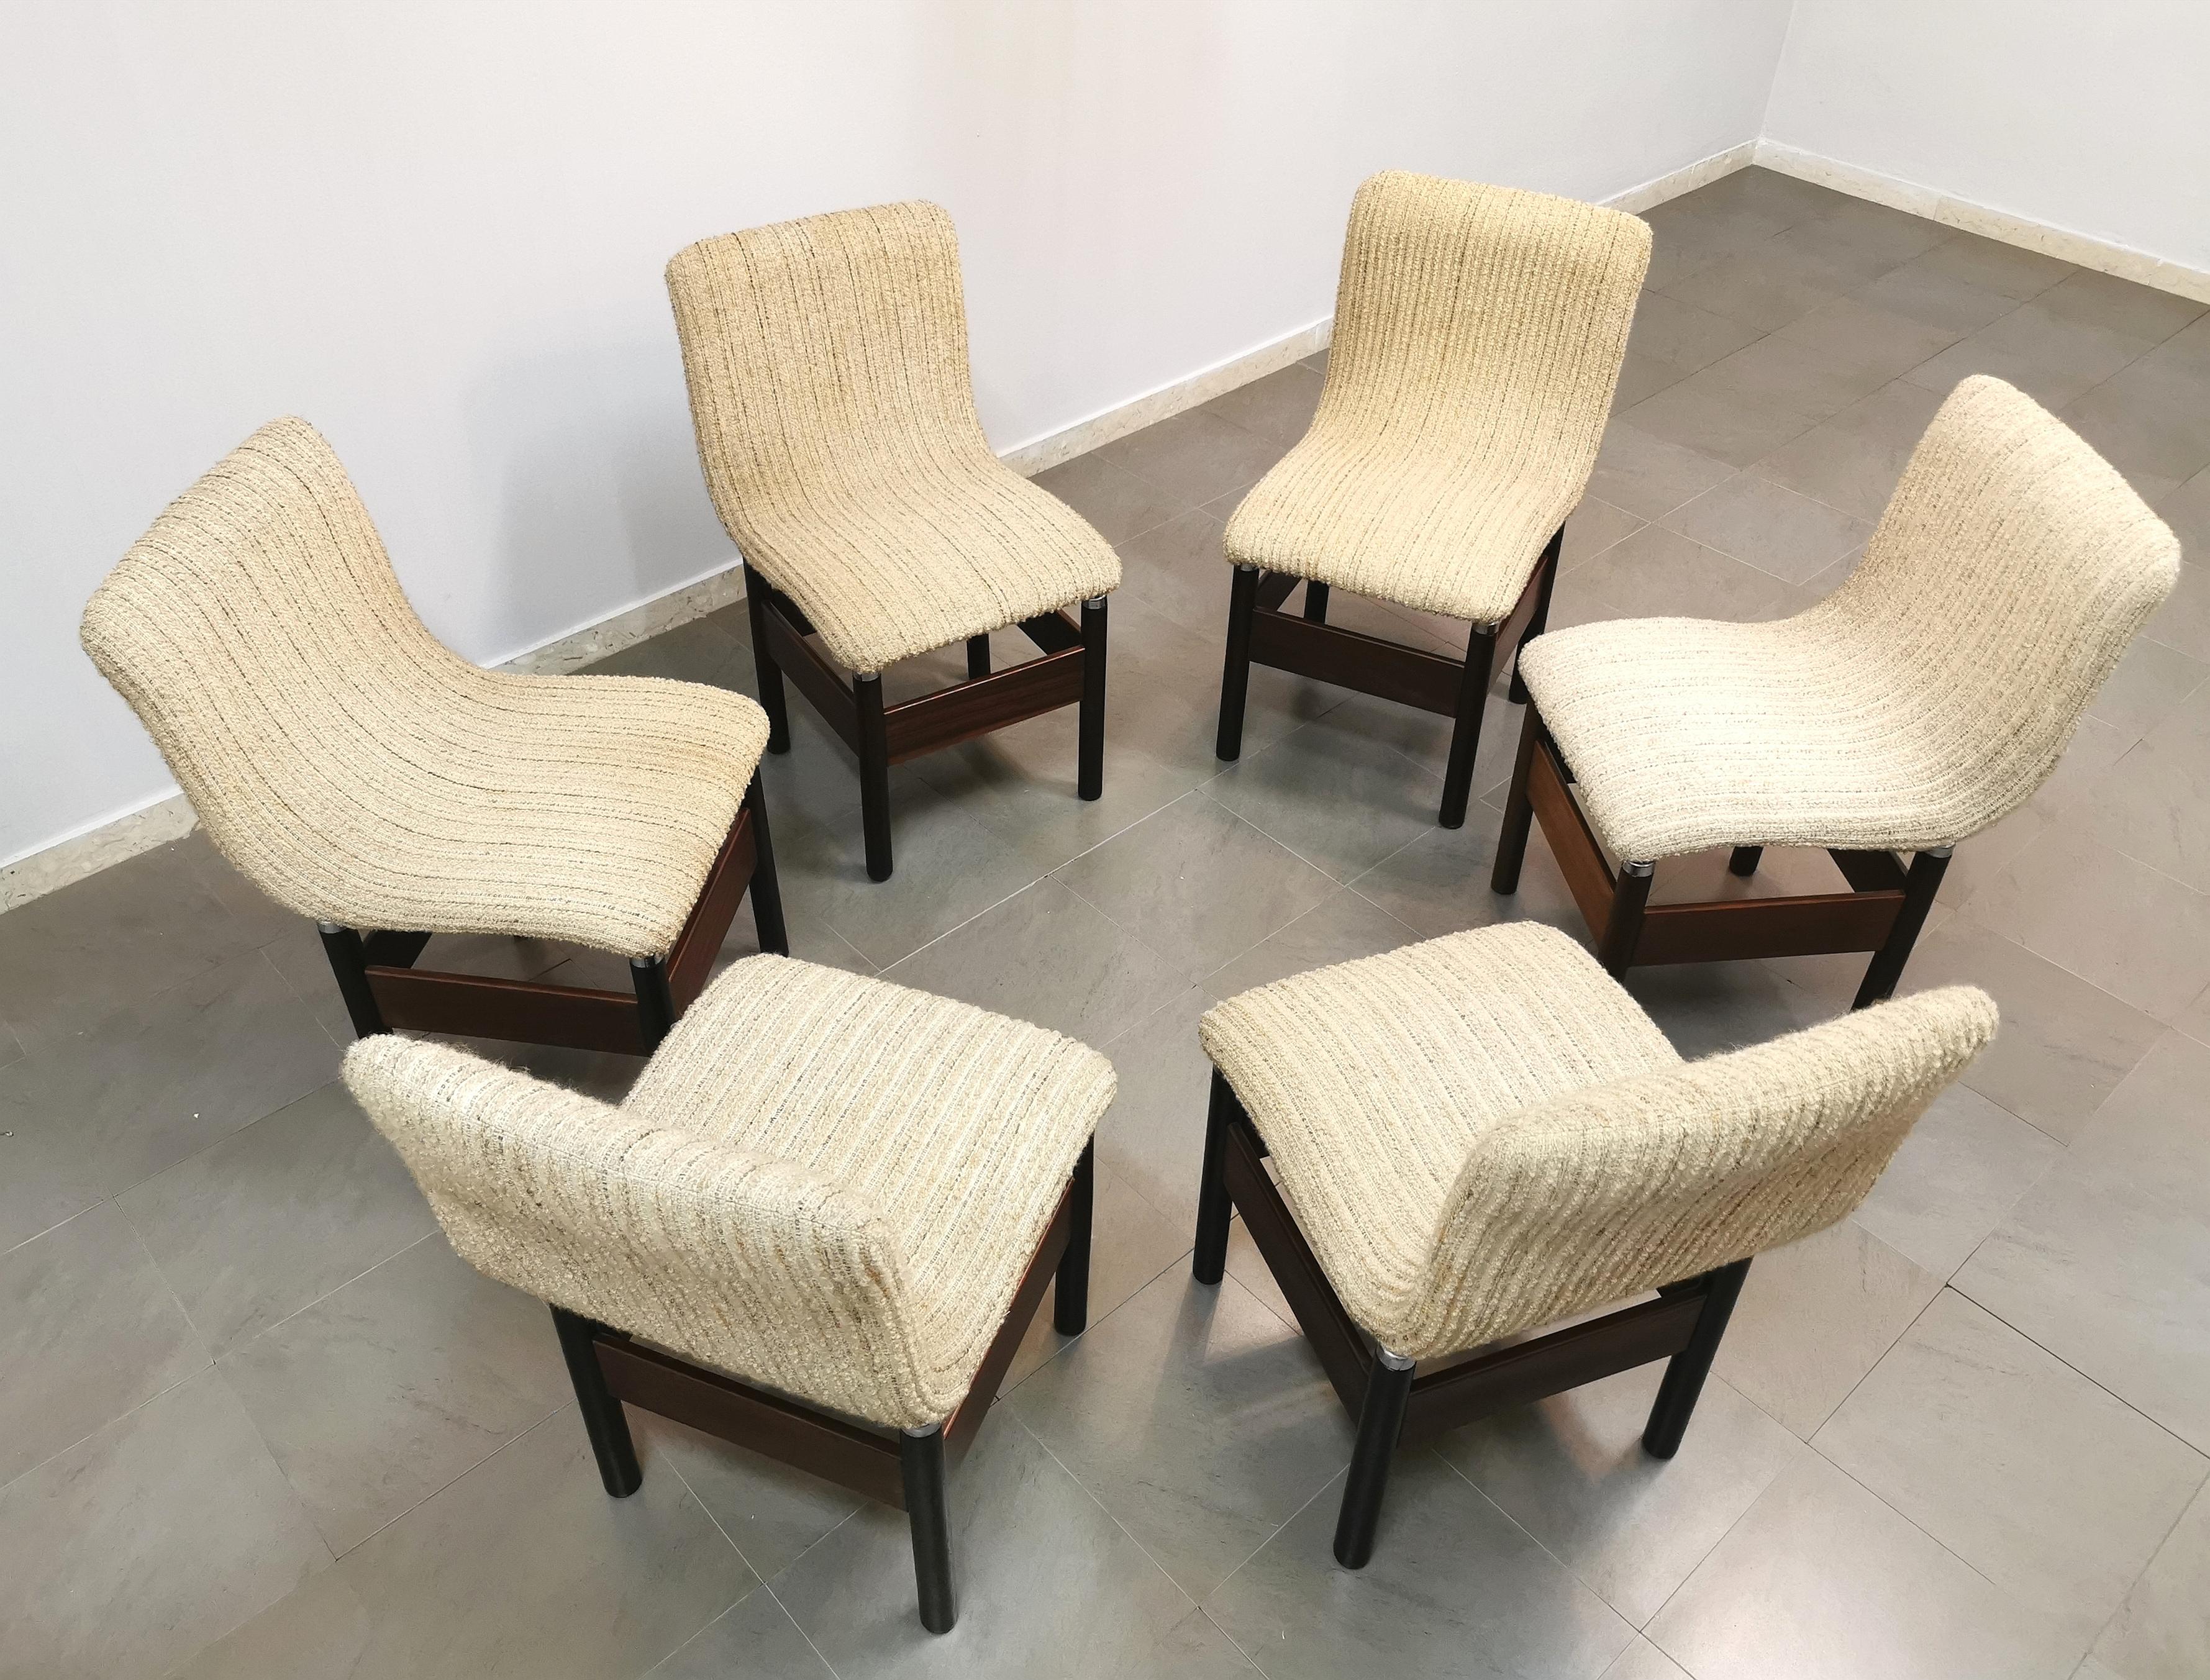 20th Century Dining Chairs Wool Wood by Vittorio Introini for Saporiti Italy 1960s Set of 6